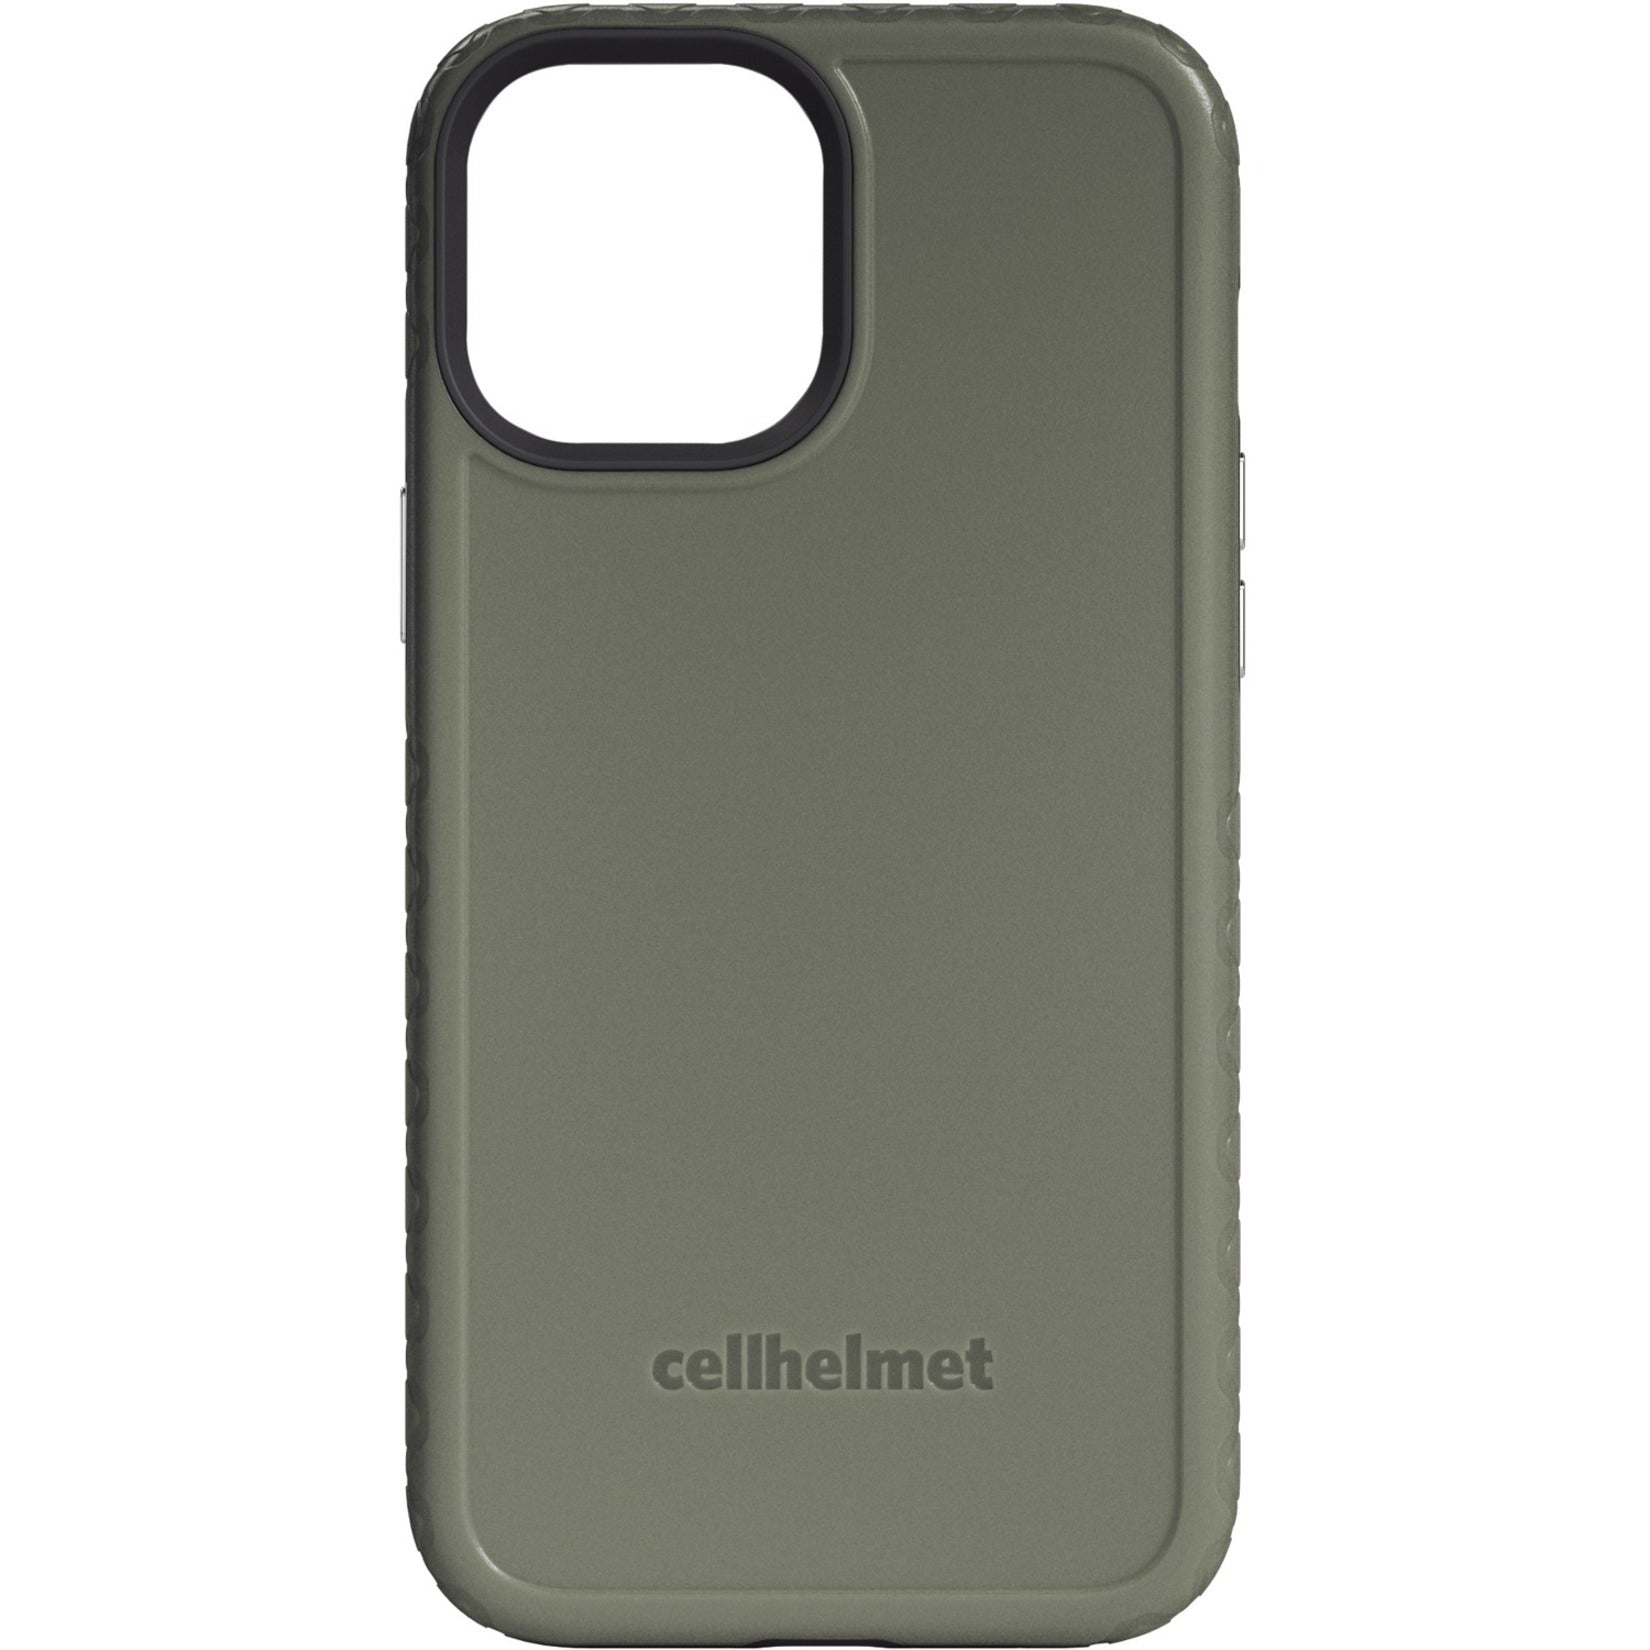 Cellhelmet Fortitude Series for iPhone 12 Pro Max - Olive Drab Green [Discontinued]